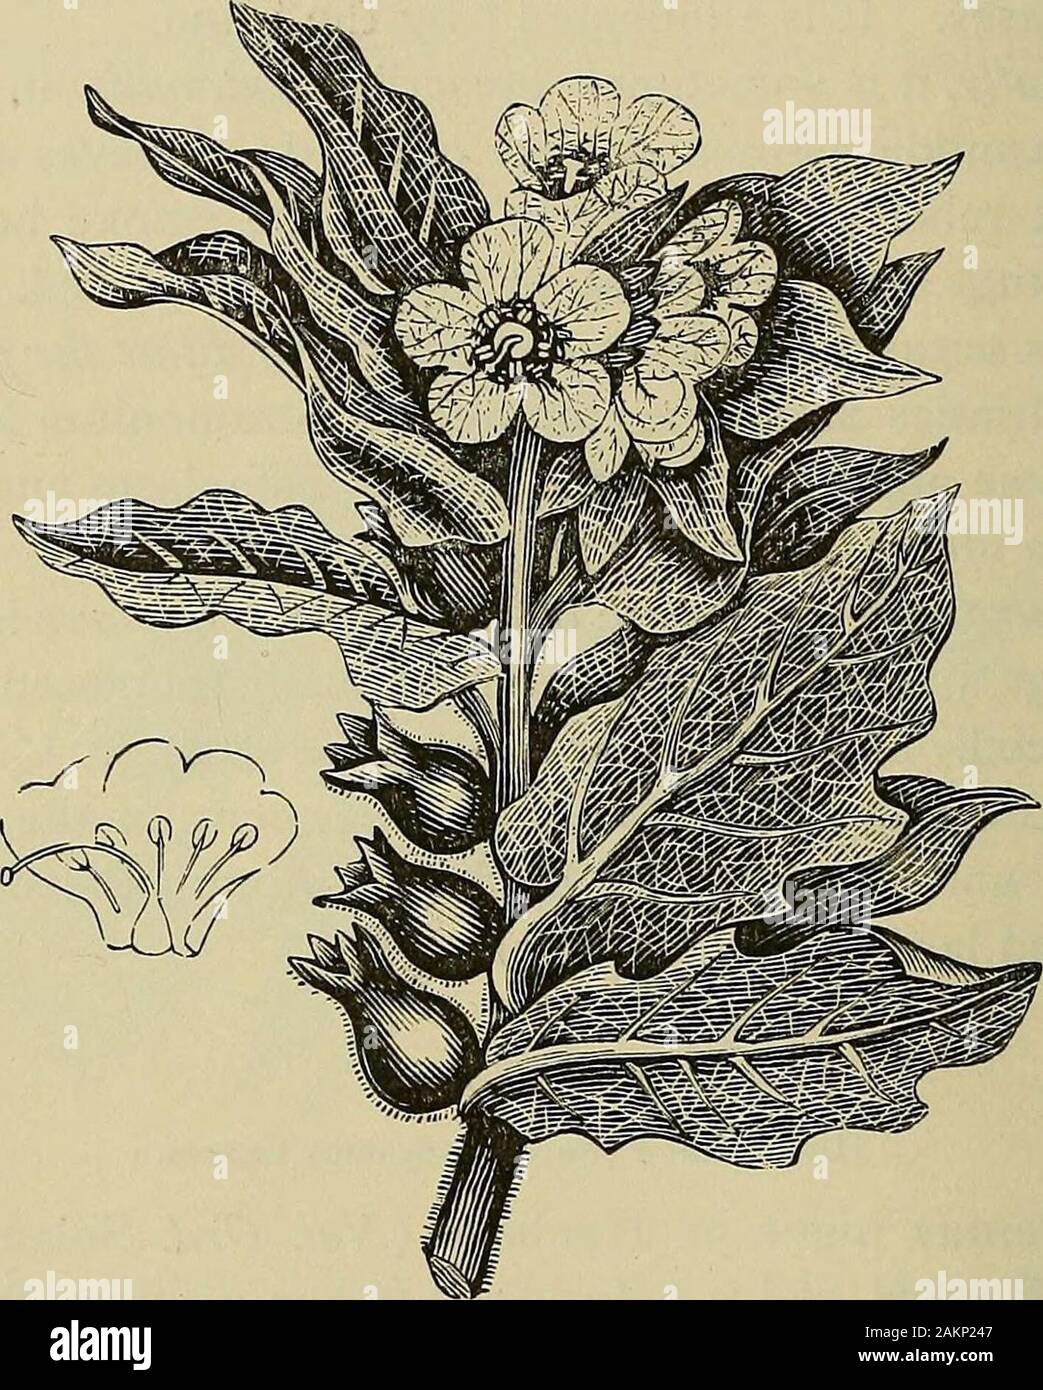 Materia medica and therapeutics : for physicians and students . e northern parts of theUnited States. It grows to the height of about two feet, withlarge sinuated, pale-green leaves, and flowers of a straw-yellowcolor. The whole plant has narcotic properties ; but the leavesonly are officinal. They should be gathered from plants of thesecond years growth when in flower. The active properties of * Am. Med. Monthly, 1856, p. 220. J Arch, de Physiologie Norm. et Pathol., t. iii, 1870, 215. Oulmont et Laurent;De IHyoscine et de la Daturine. 96 MATERIA MEDICA NEUROTICS. the plant depend upon two al Stock Photo